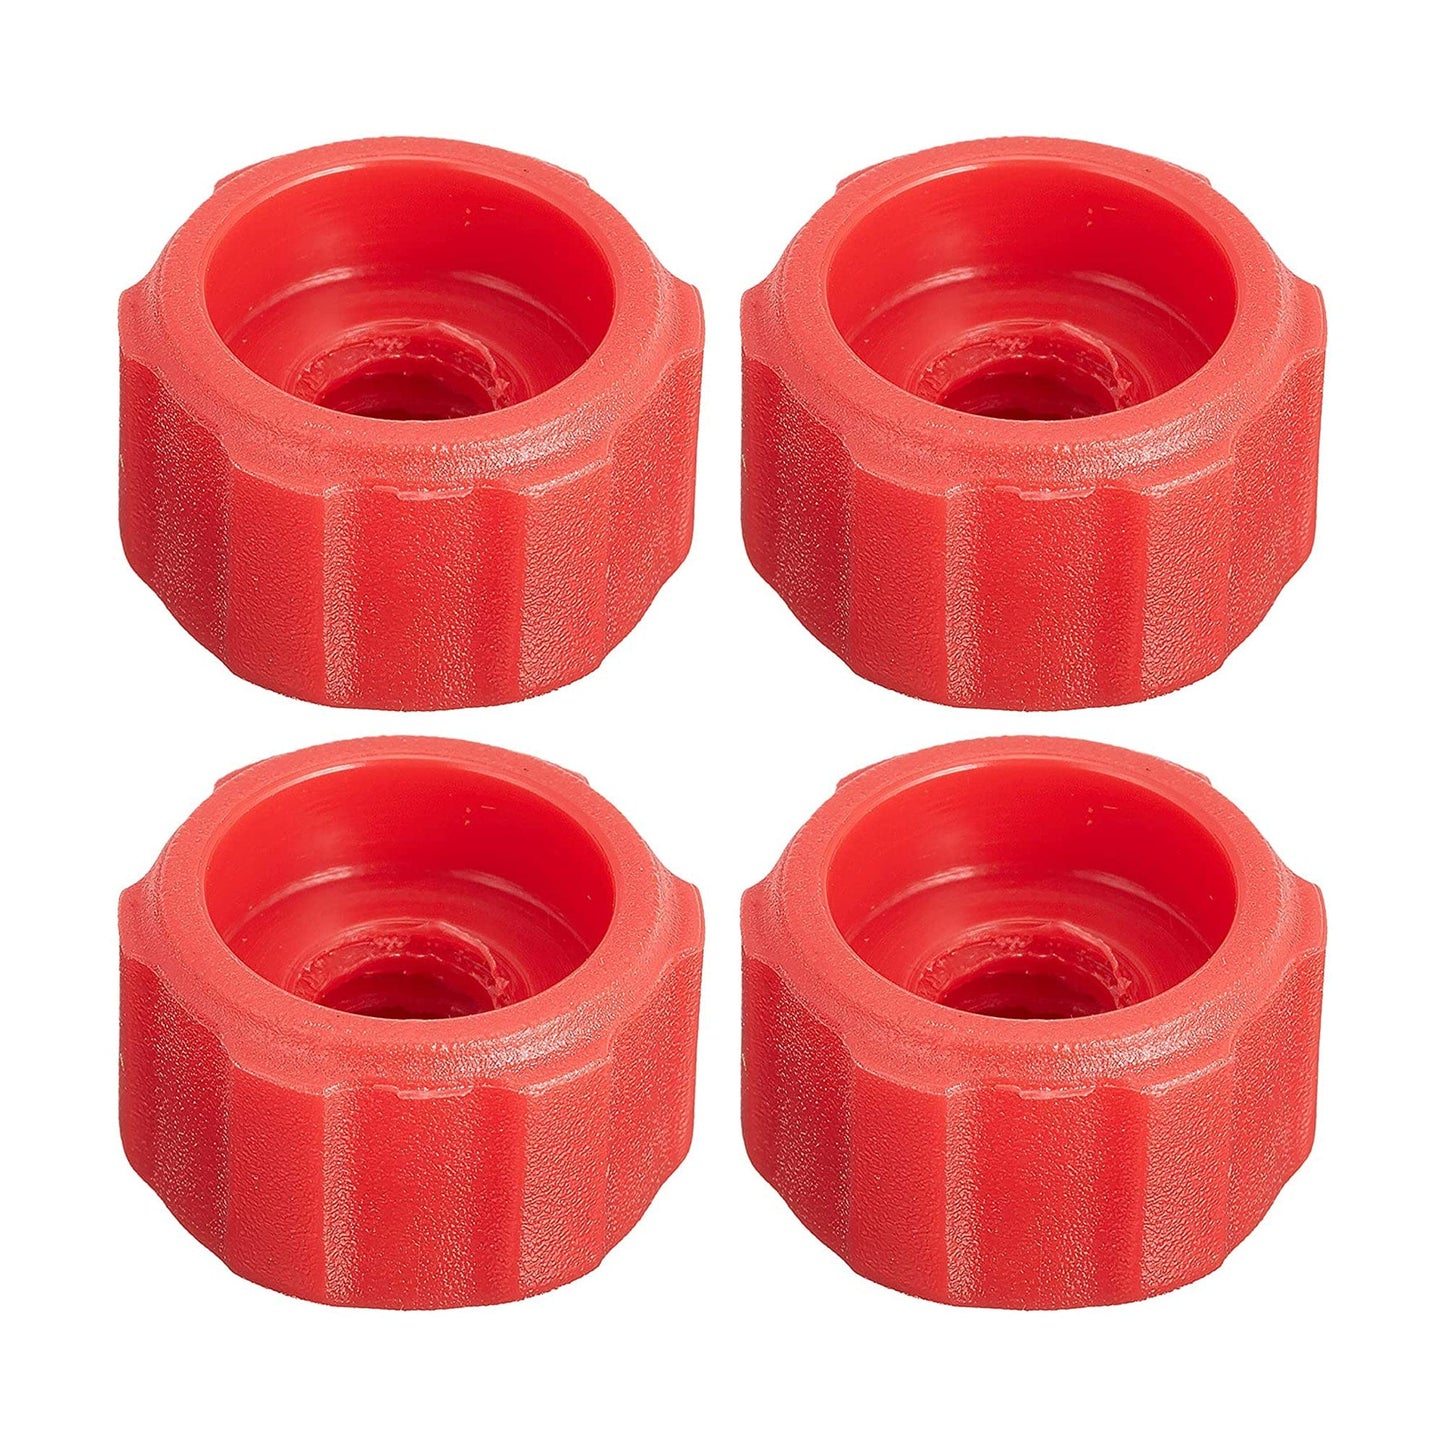 Canopus Red Lock Tuning Locks (8 Pack Bundle) Drums and Percussion / Parts and Accessories / Drum Parts